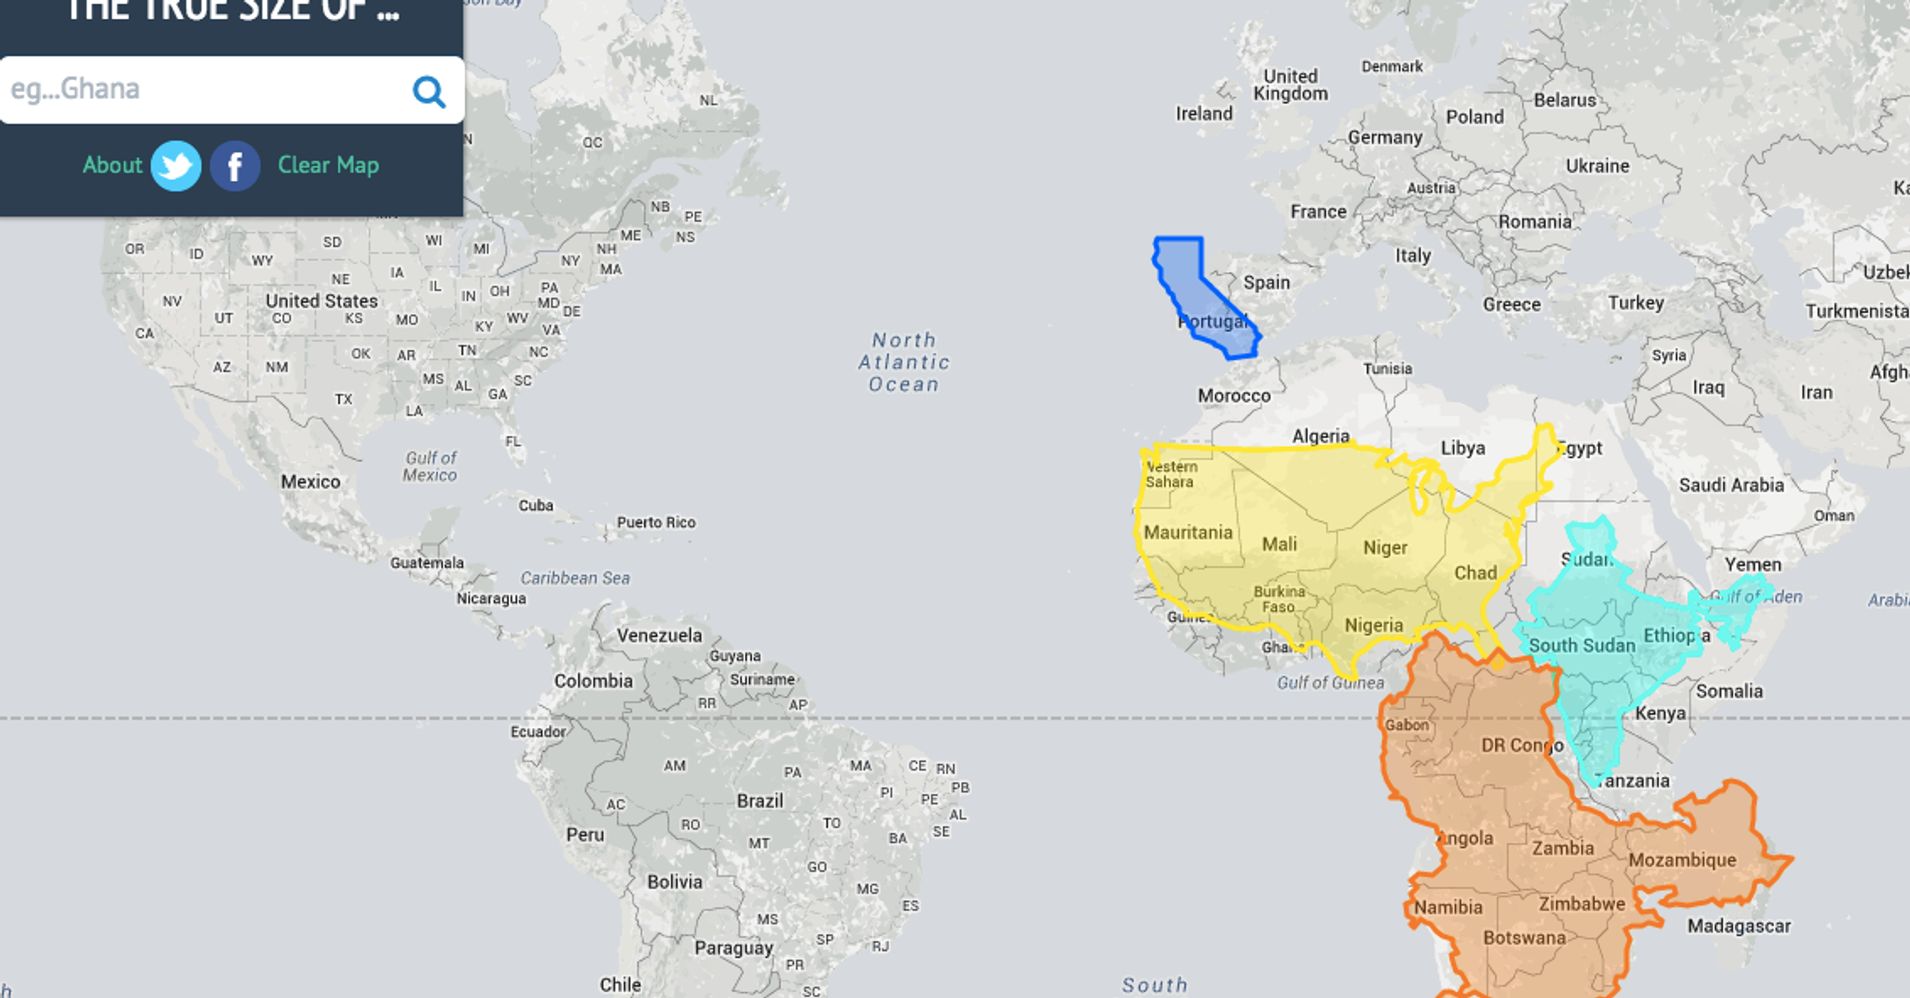 'True Size Map' Proves You've Been Picturing The Planet All Wrong